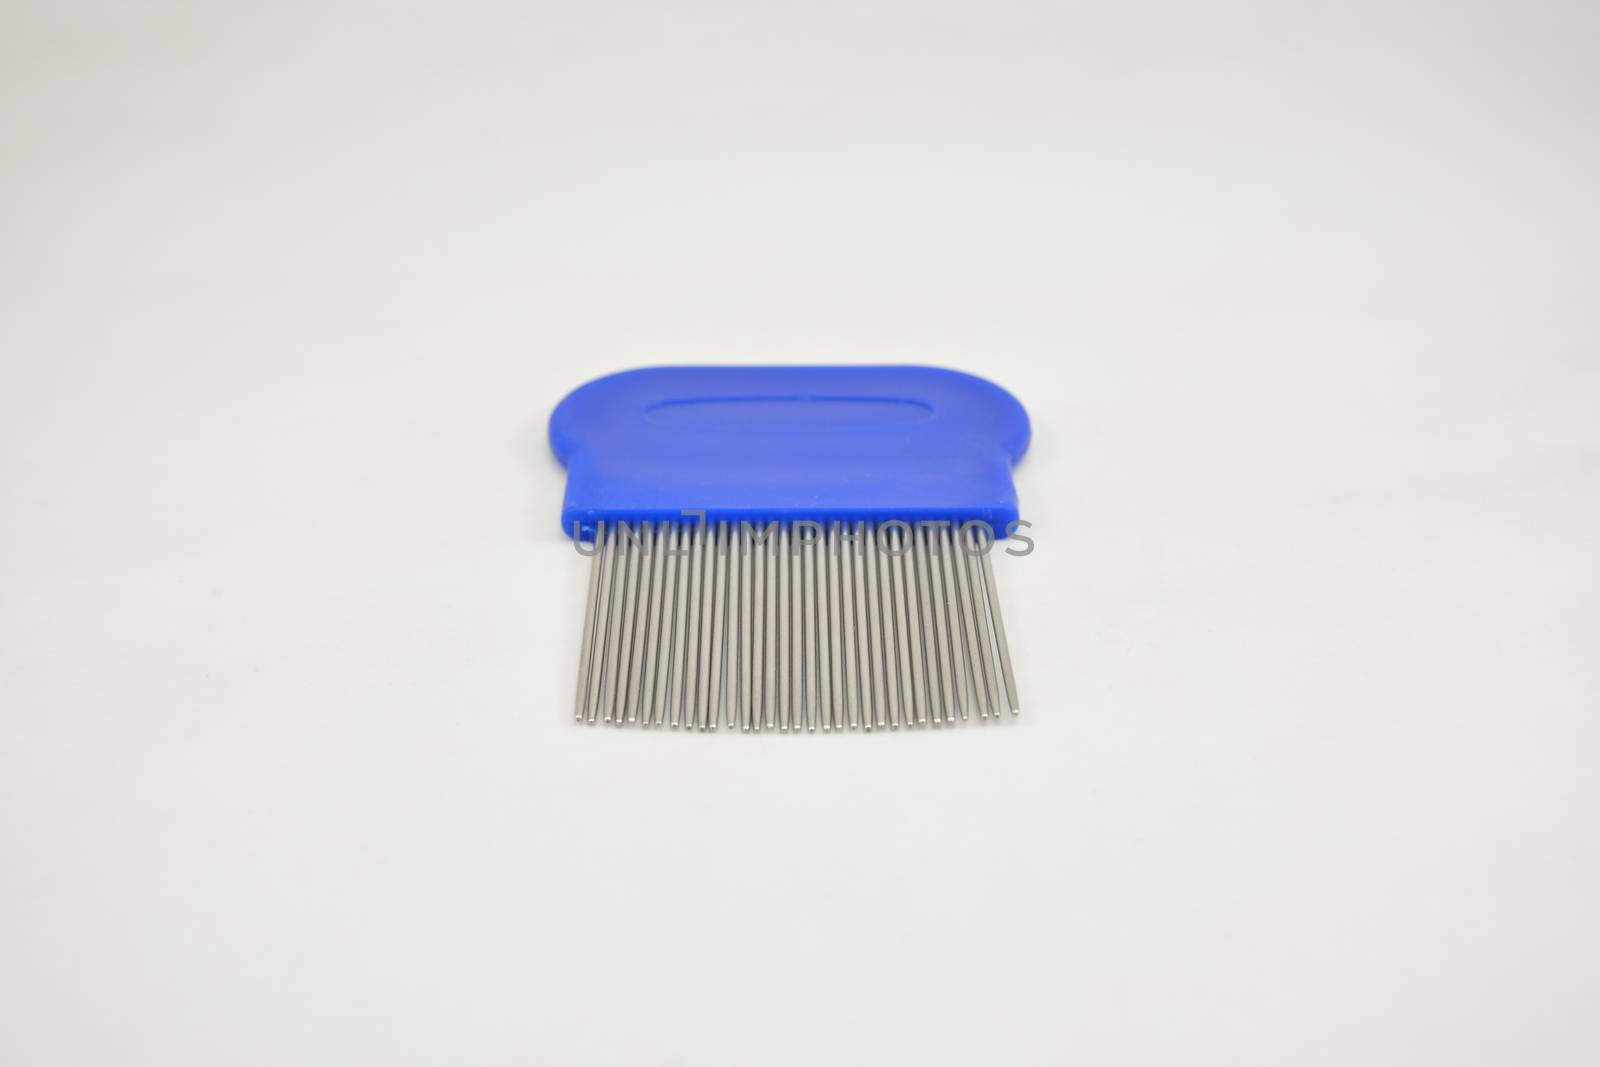 Lice comb stainless steel tooth blue handle by imwaltersy